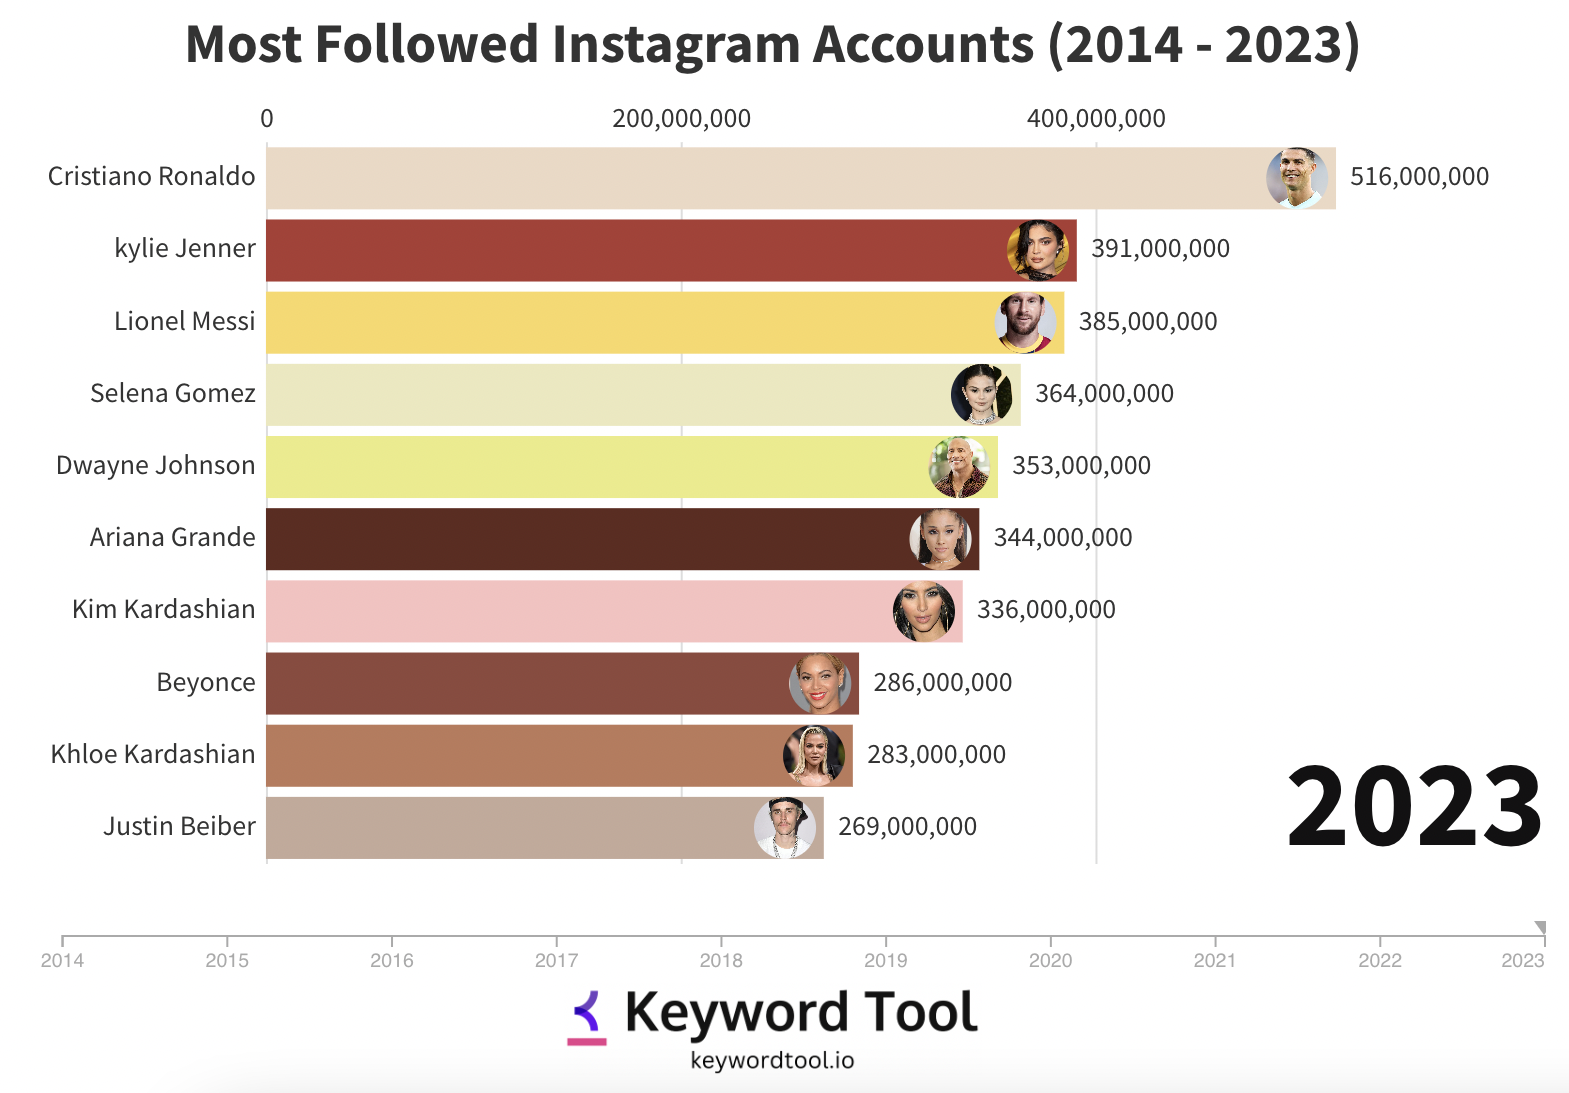 Who are the top 10 most-followed celebrities on Instagram in 2023